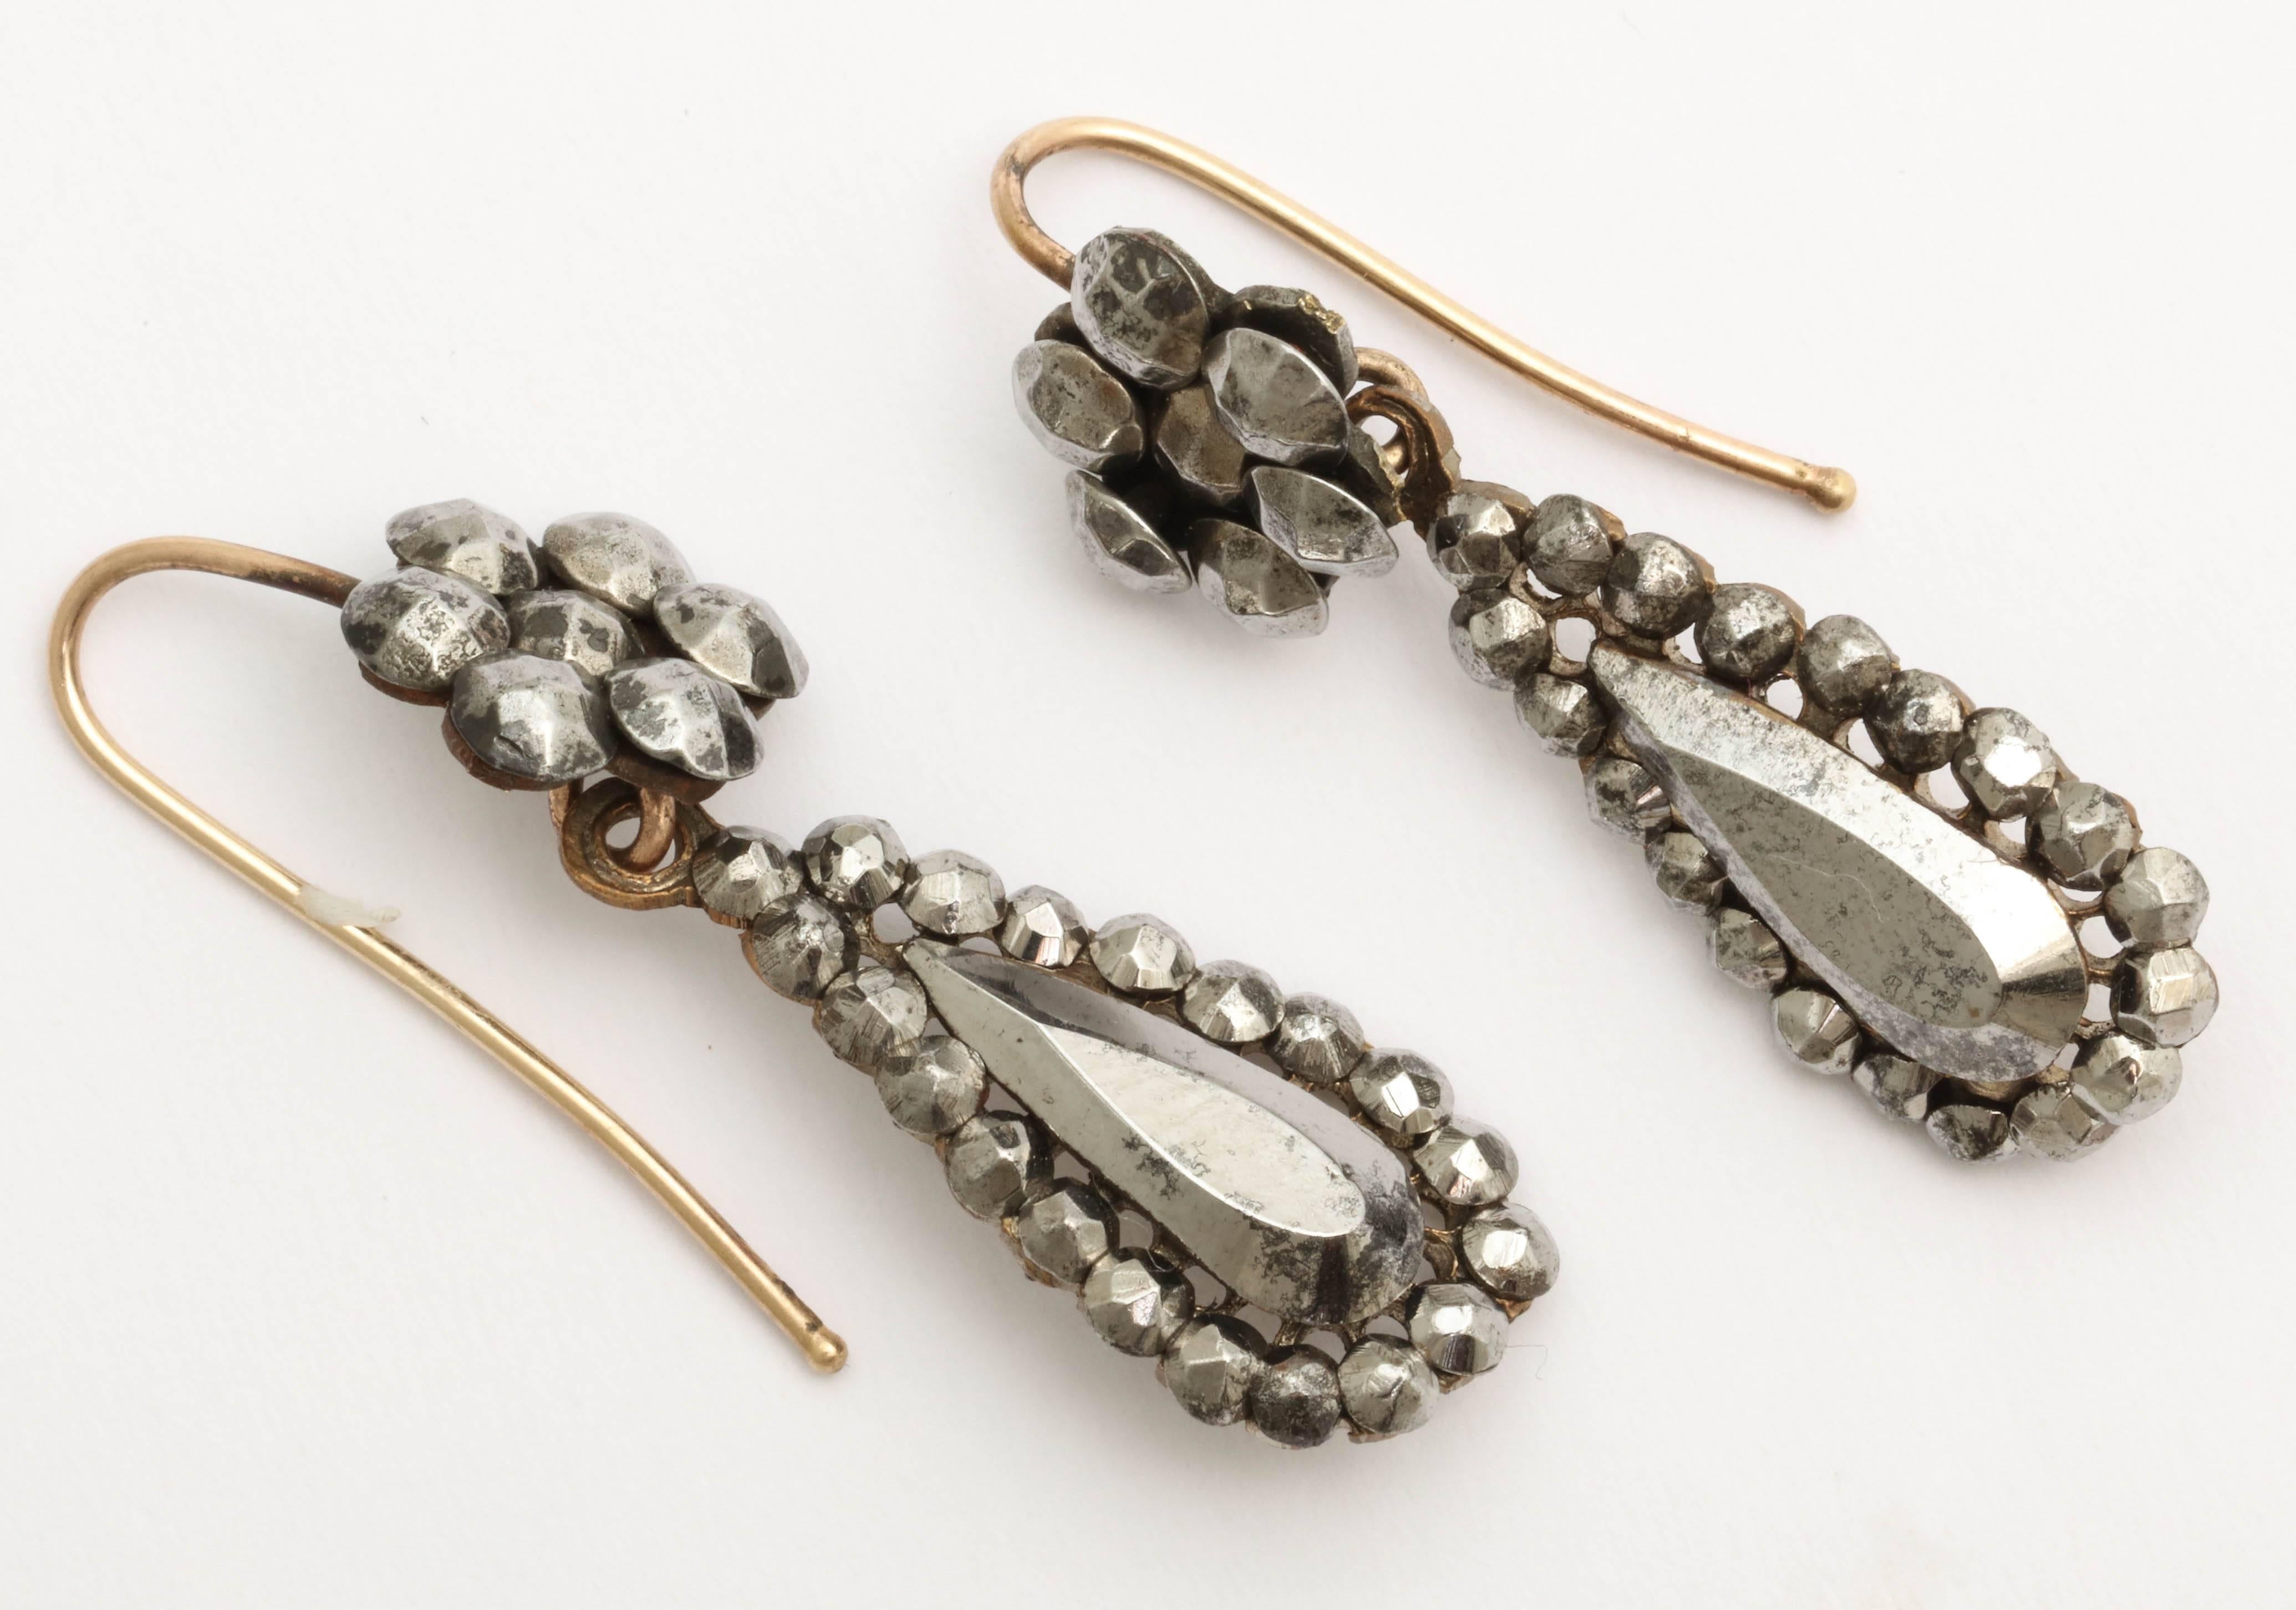 Easy to wear and beautifully made, these cut steel earrings with gold backs and ear wires date to the 1860s. A tear drop shape cluster dangles from the floral cluster top. 